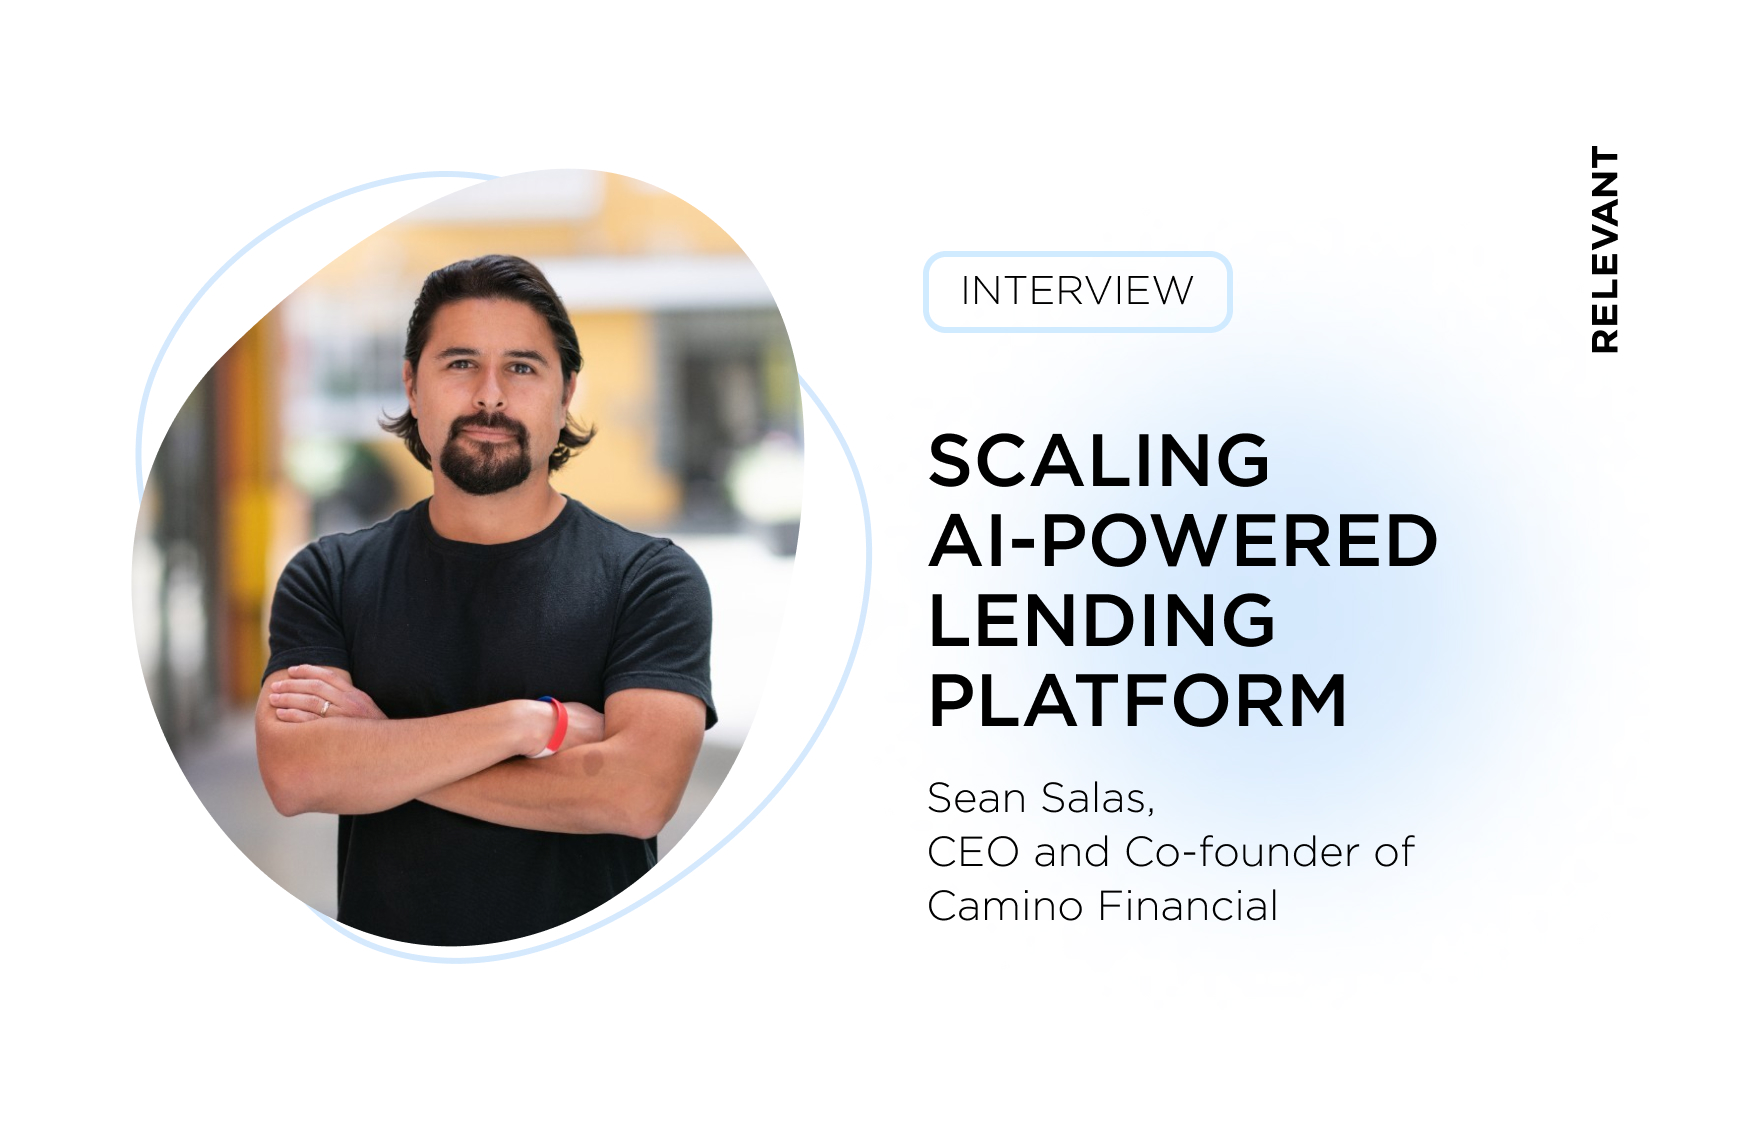 Sean Salas, CEO, and Co-founder of Camino Financial, Discusses Scaling an AI-Powered Lending Platform and the Rise of the Solopreneur